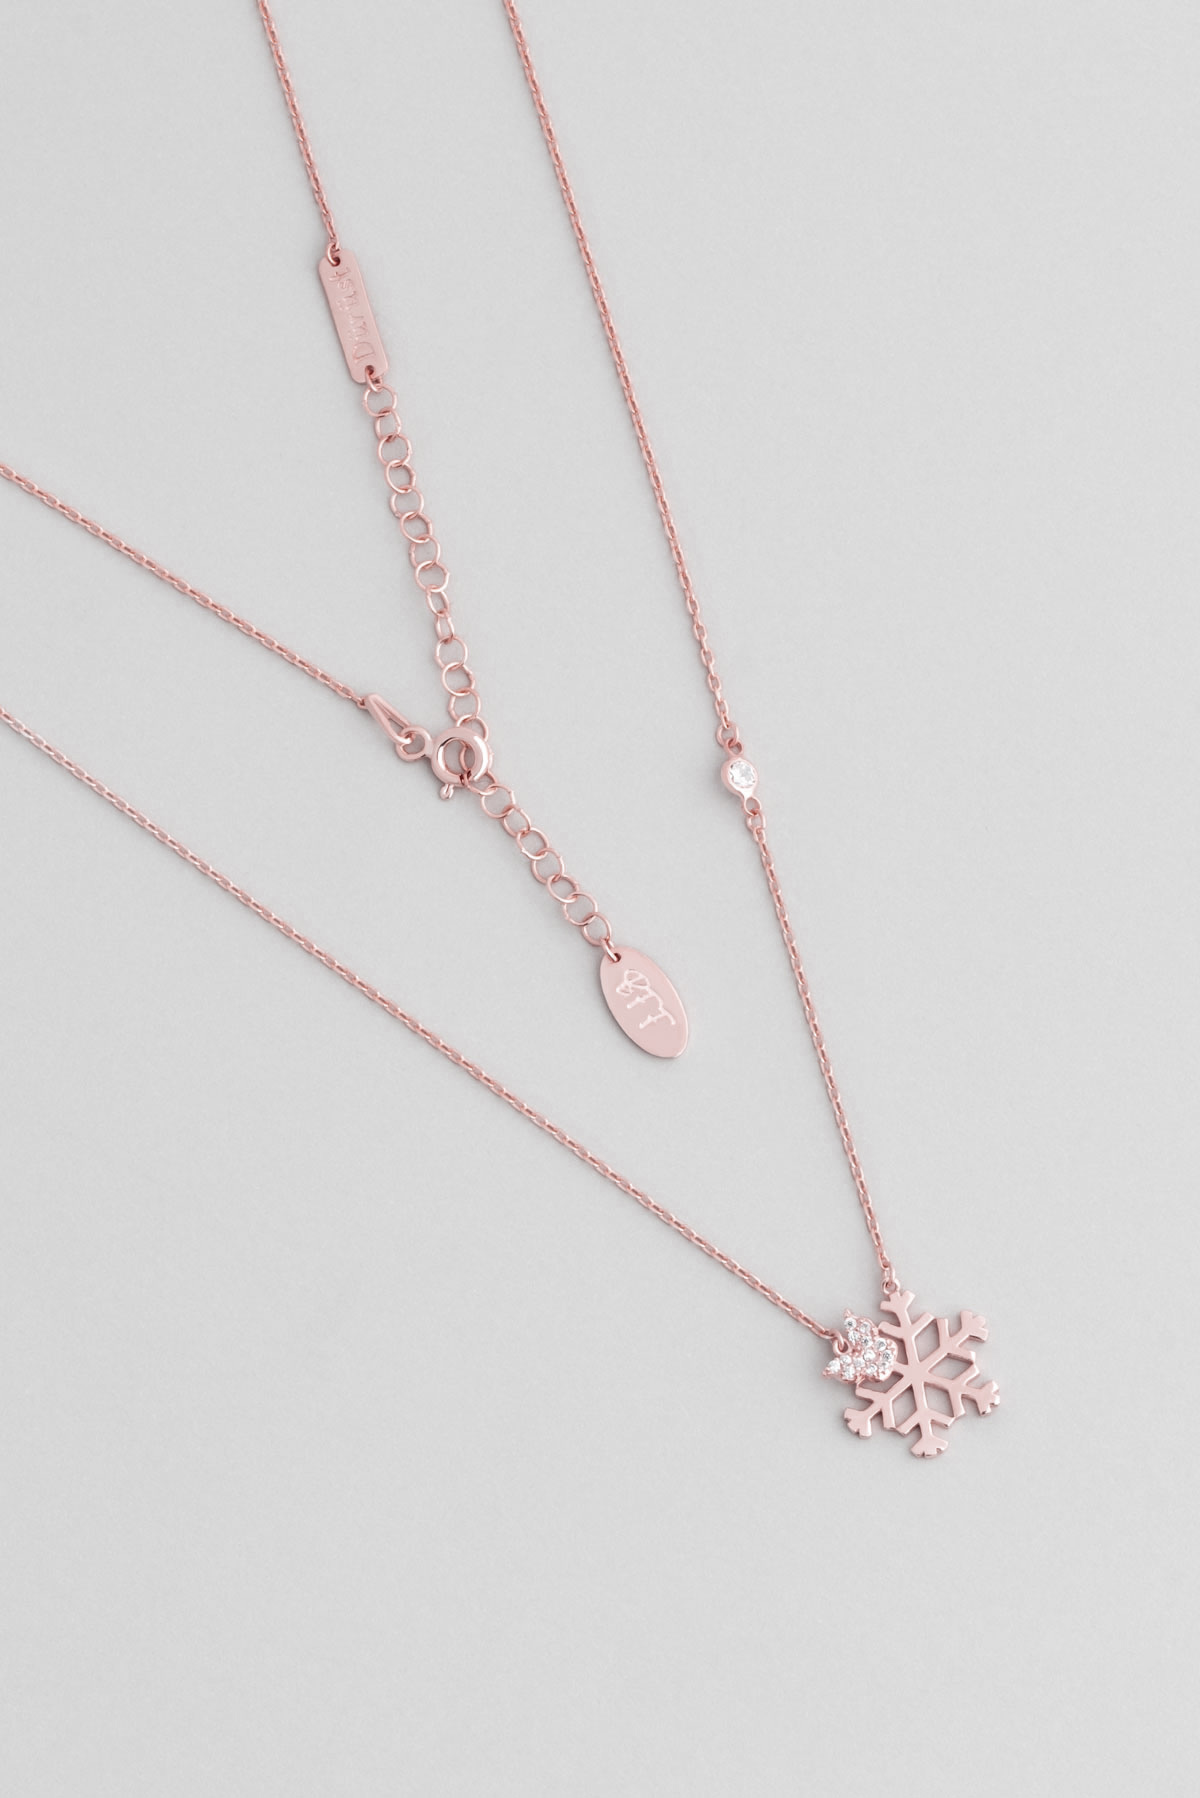 18 Karat Rose Gold Plated Silver Snowflake Necklace